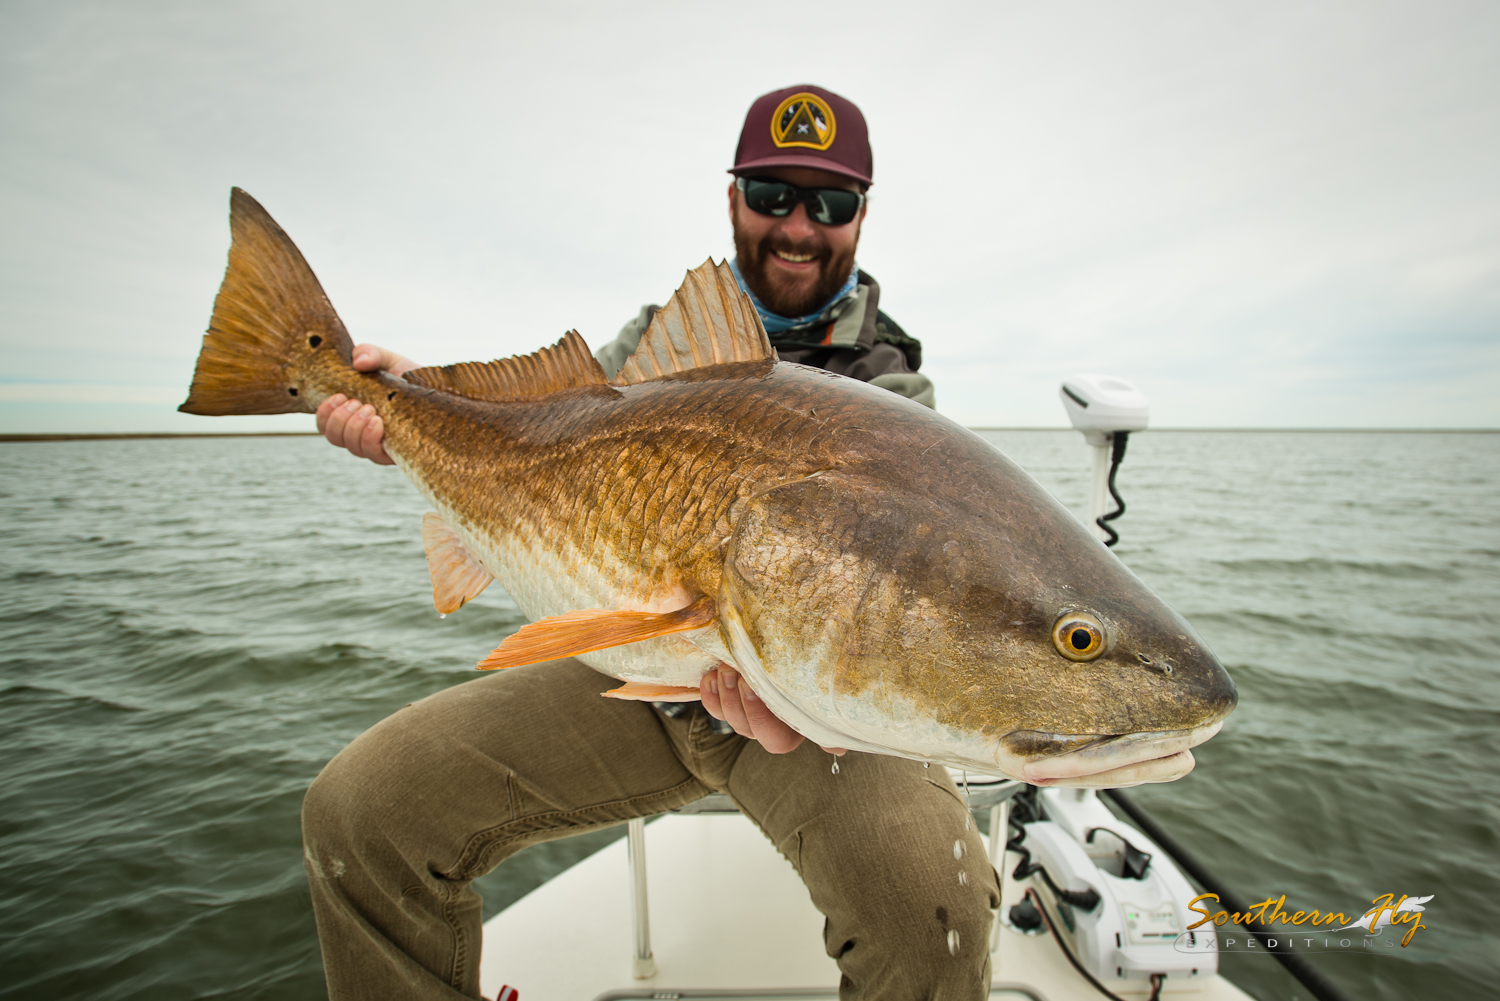 redfish fly fishing new orleans best winter fishing guide southern fly expeditions